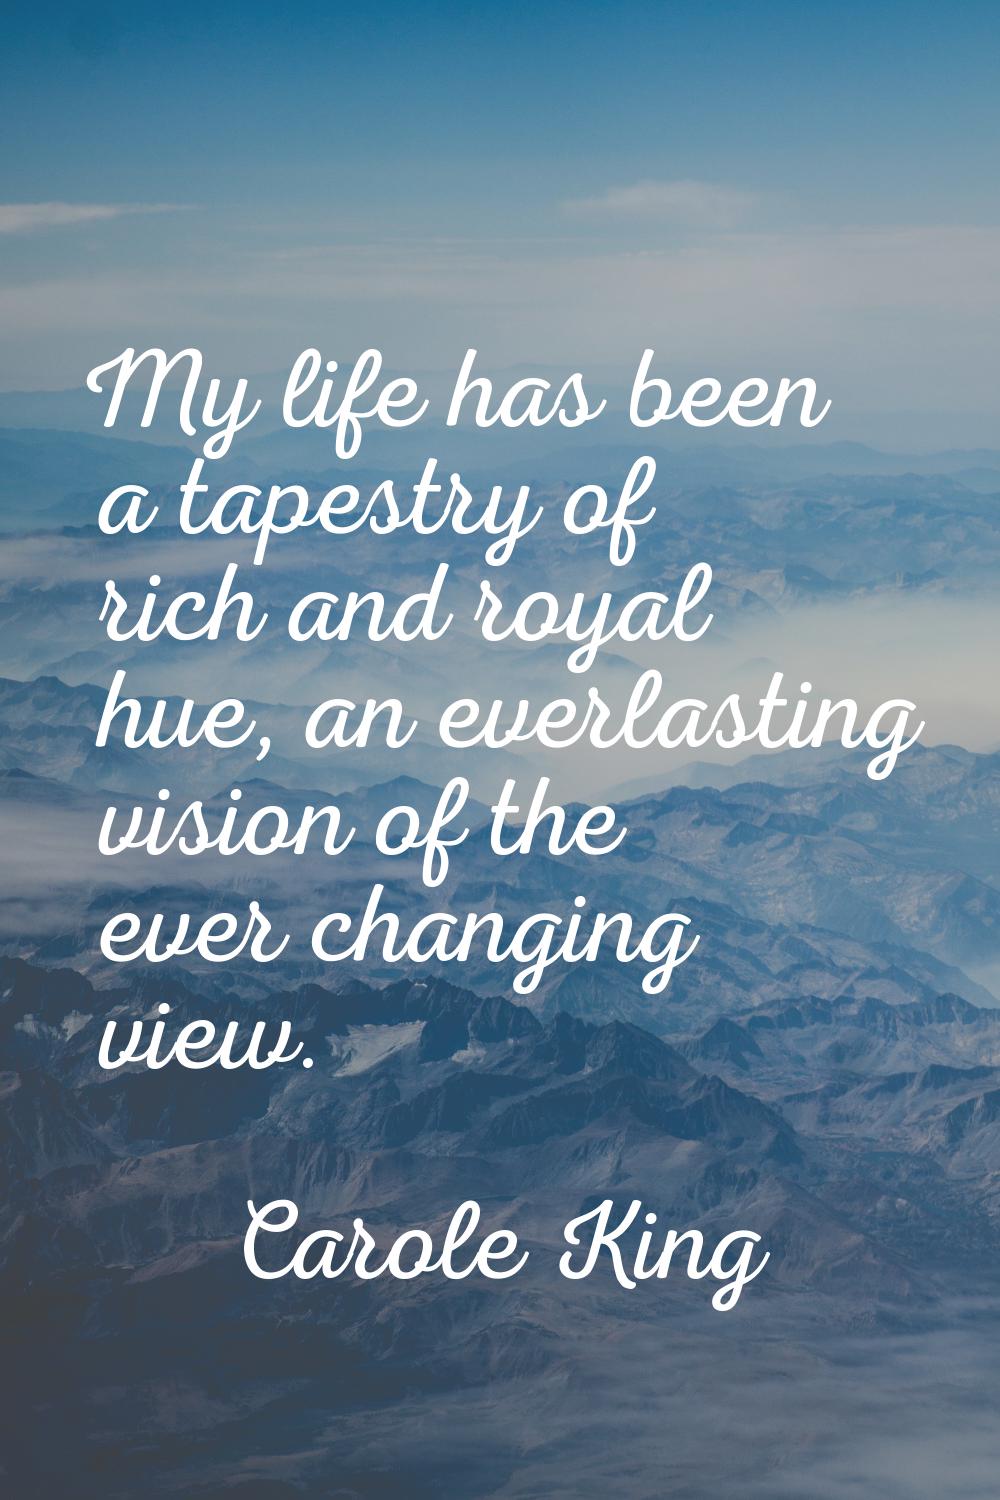 My life has been a tapestry of rich and royal hue, an everlasting vision of the ever changing view.